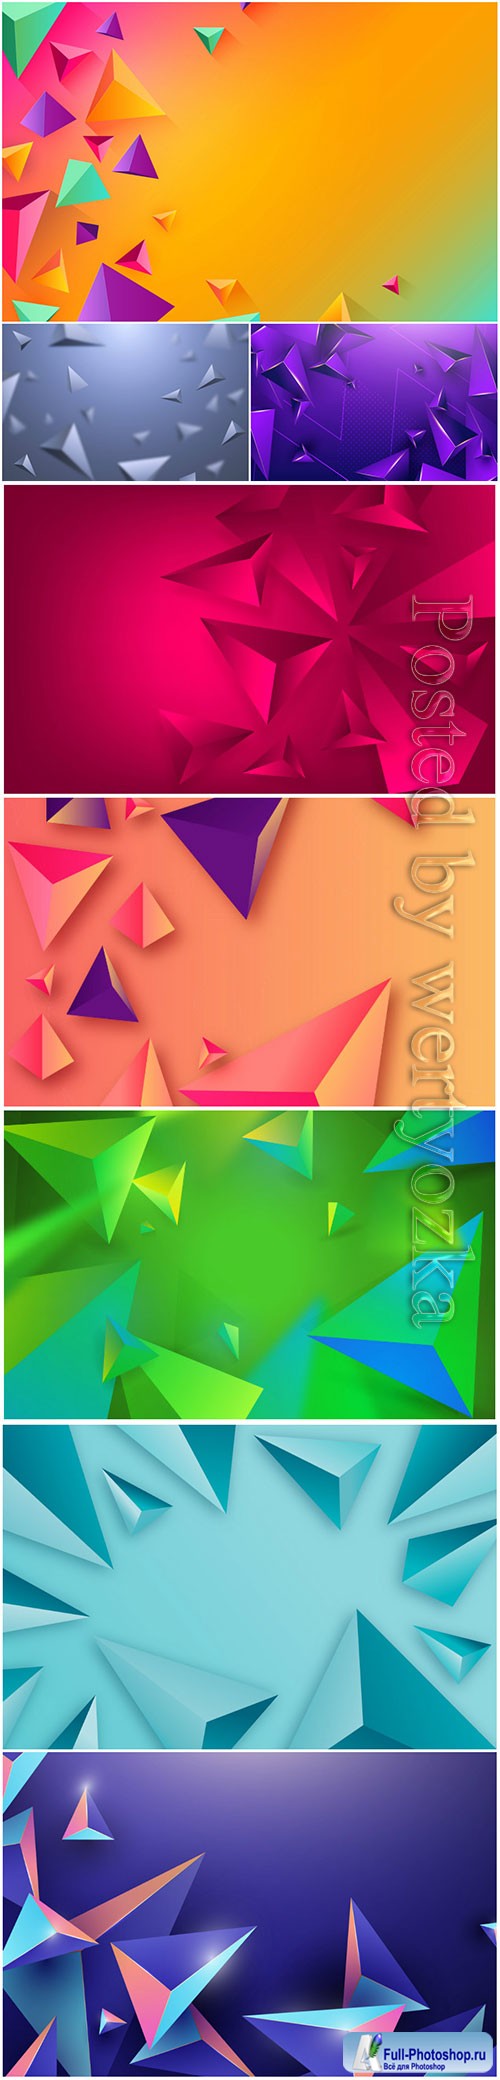 Abstract vector background, 3d models template # 7